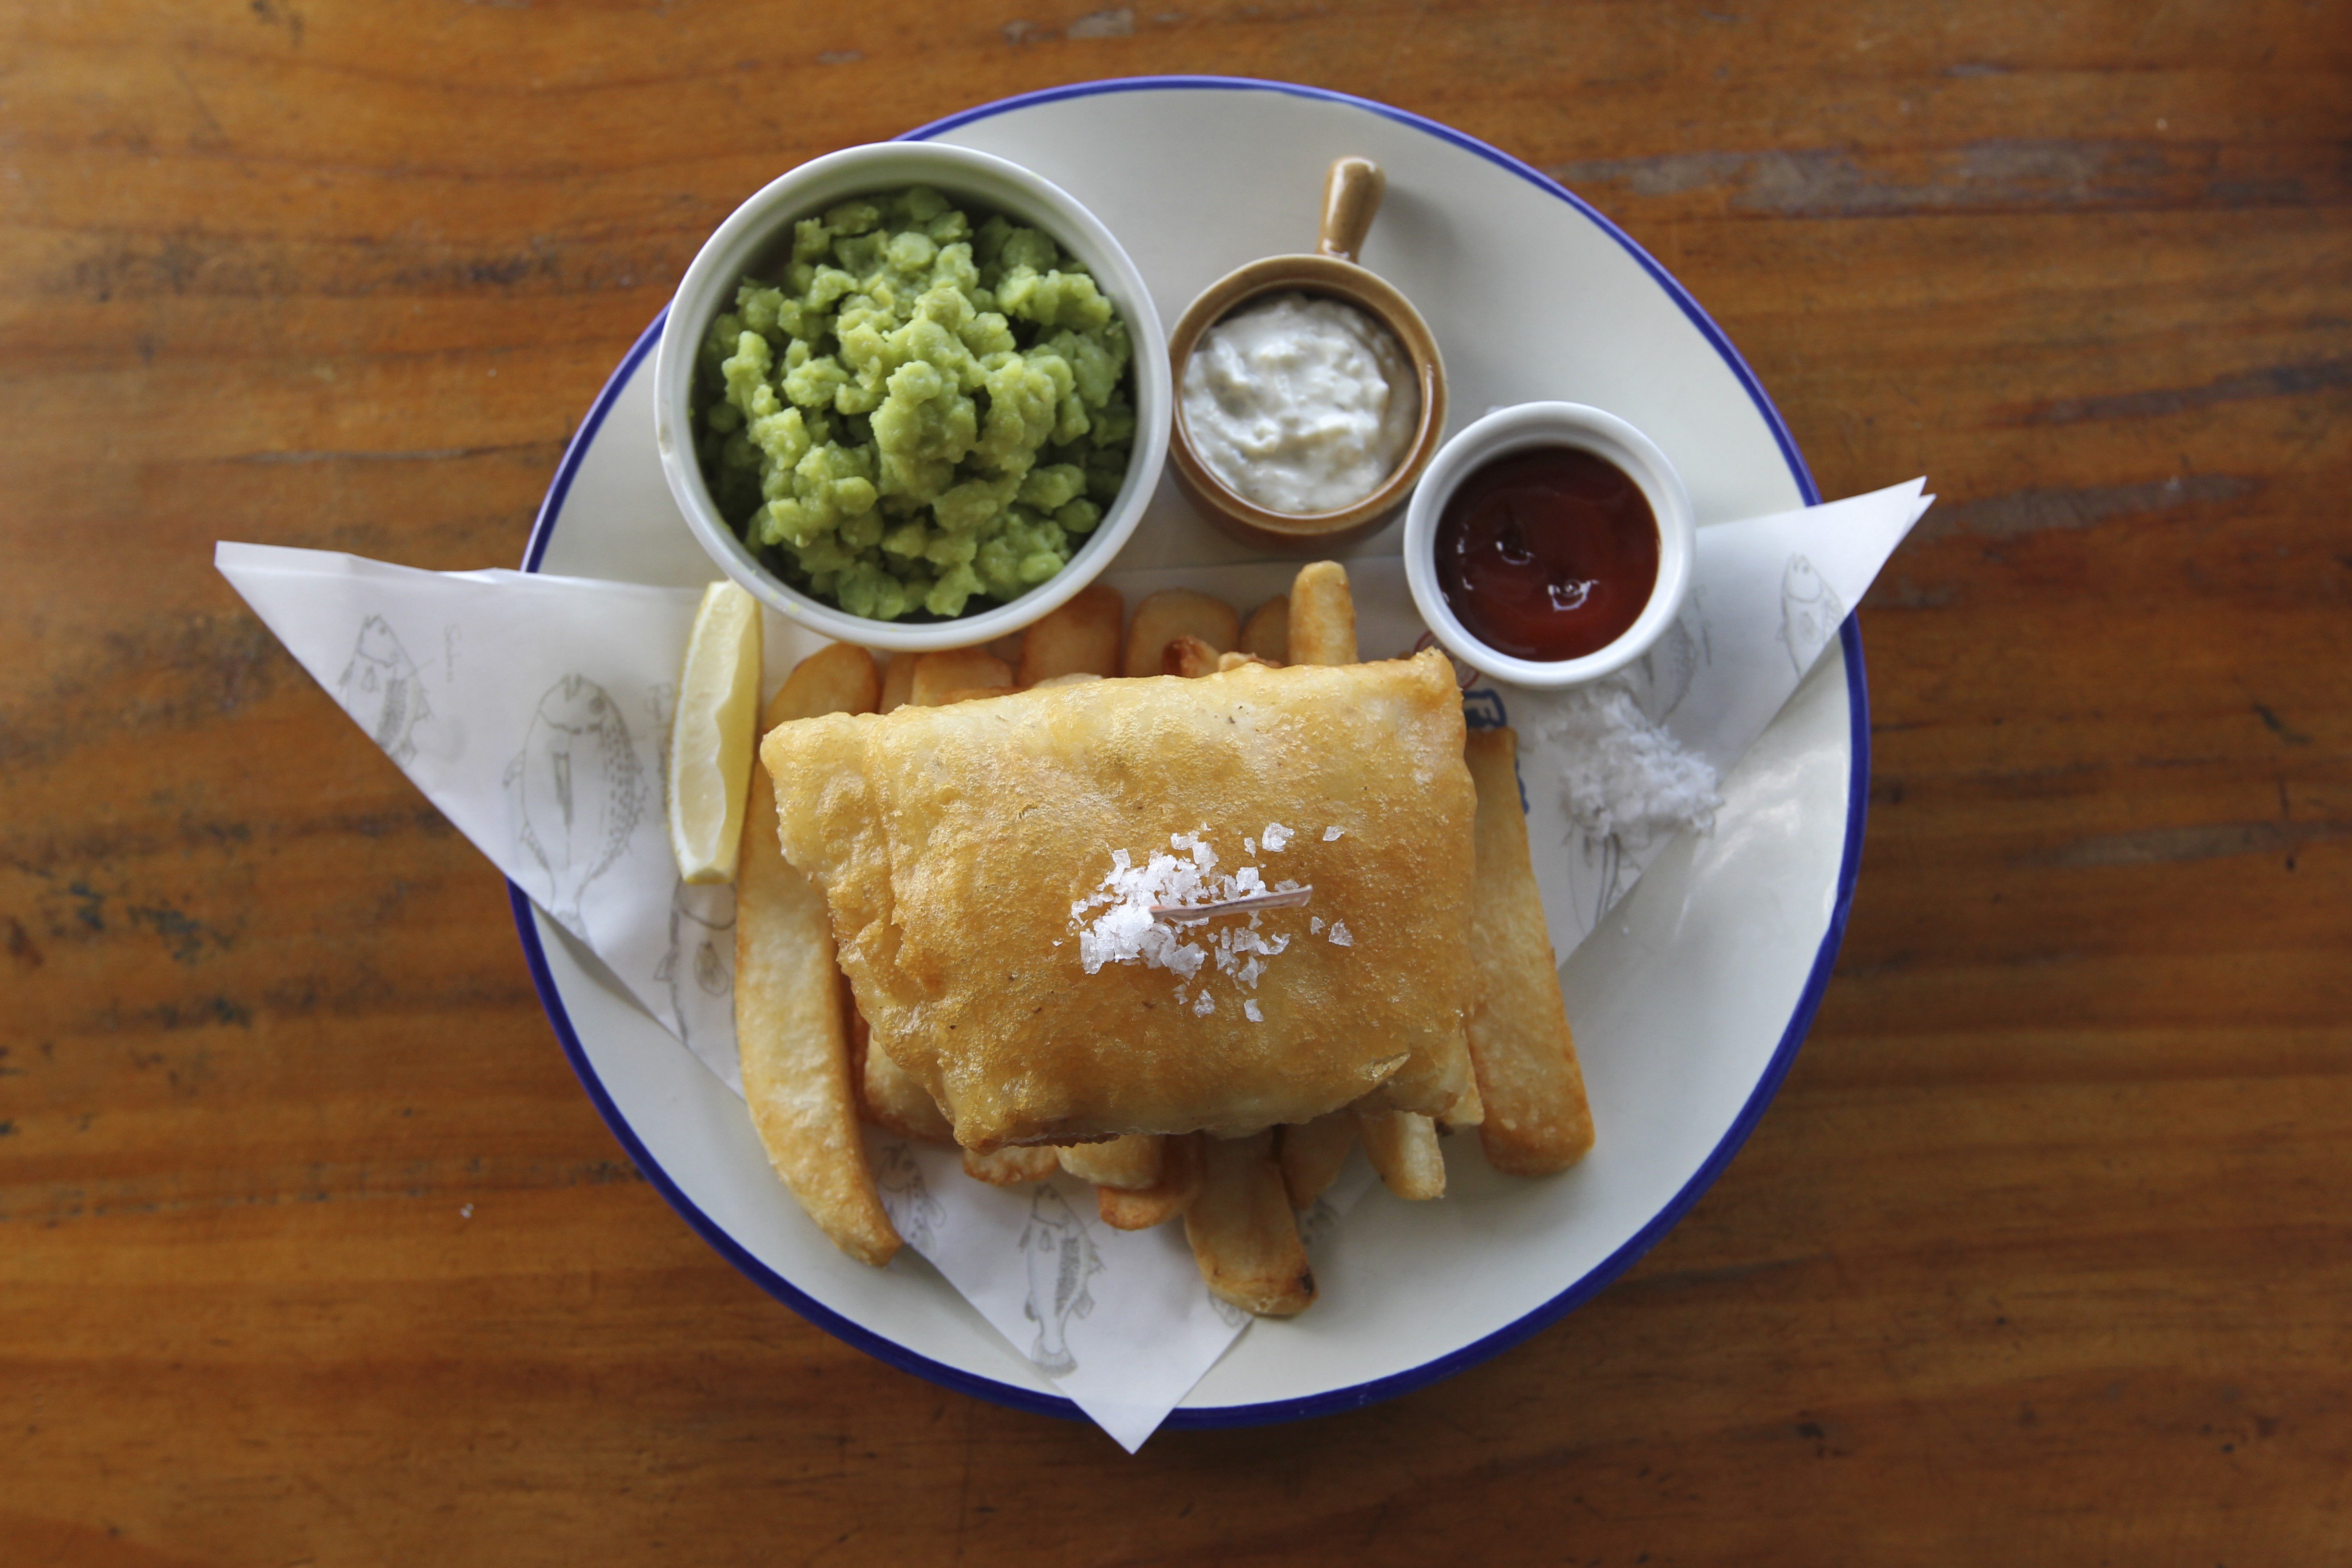 Haddock and chips with mushy peas from Fish and Chick in Kennedy Town. Photo: Roy Issa